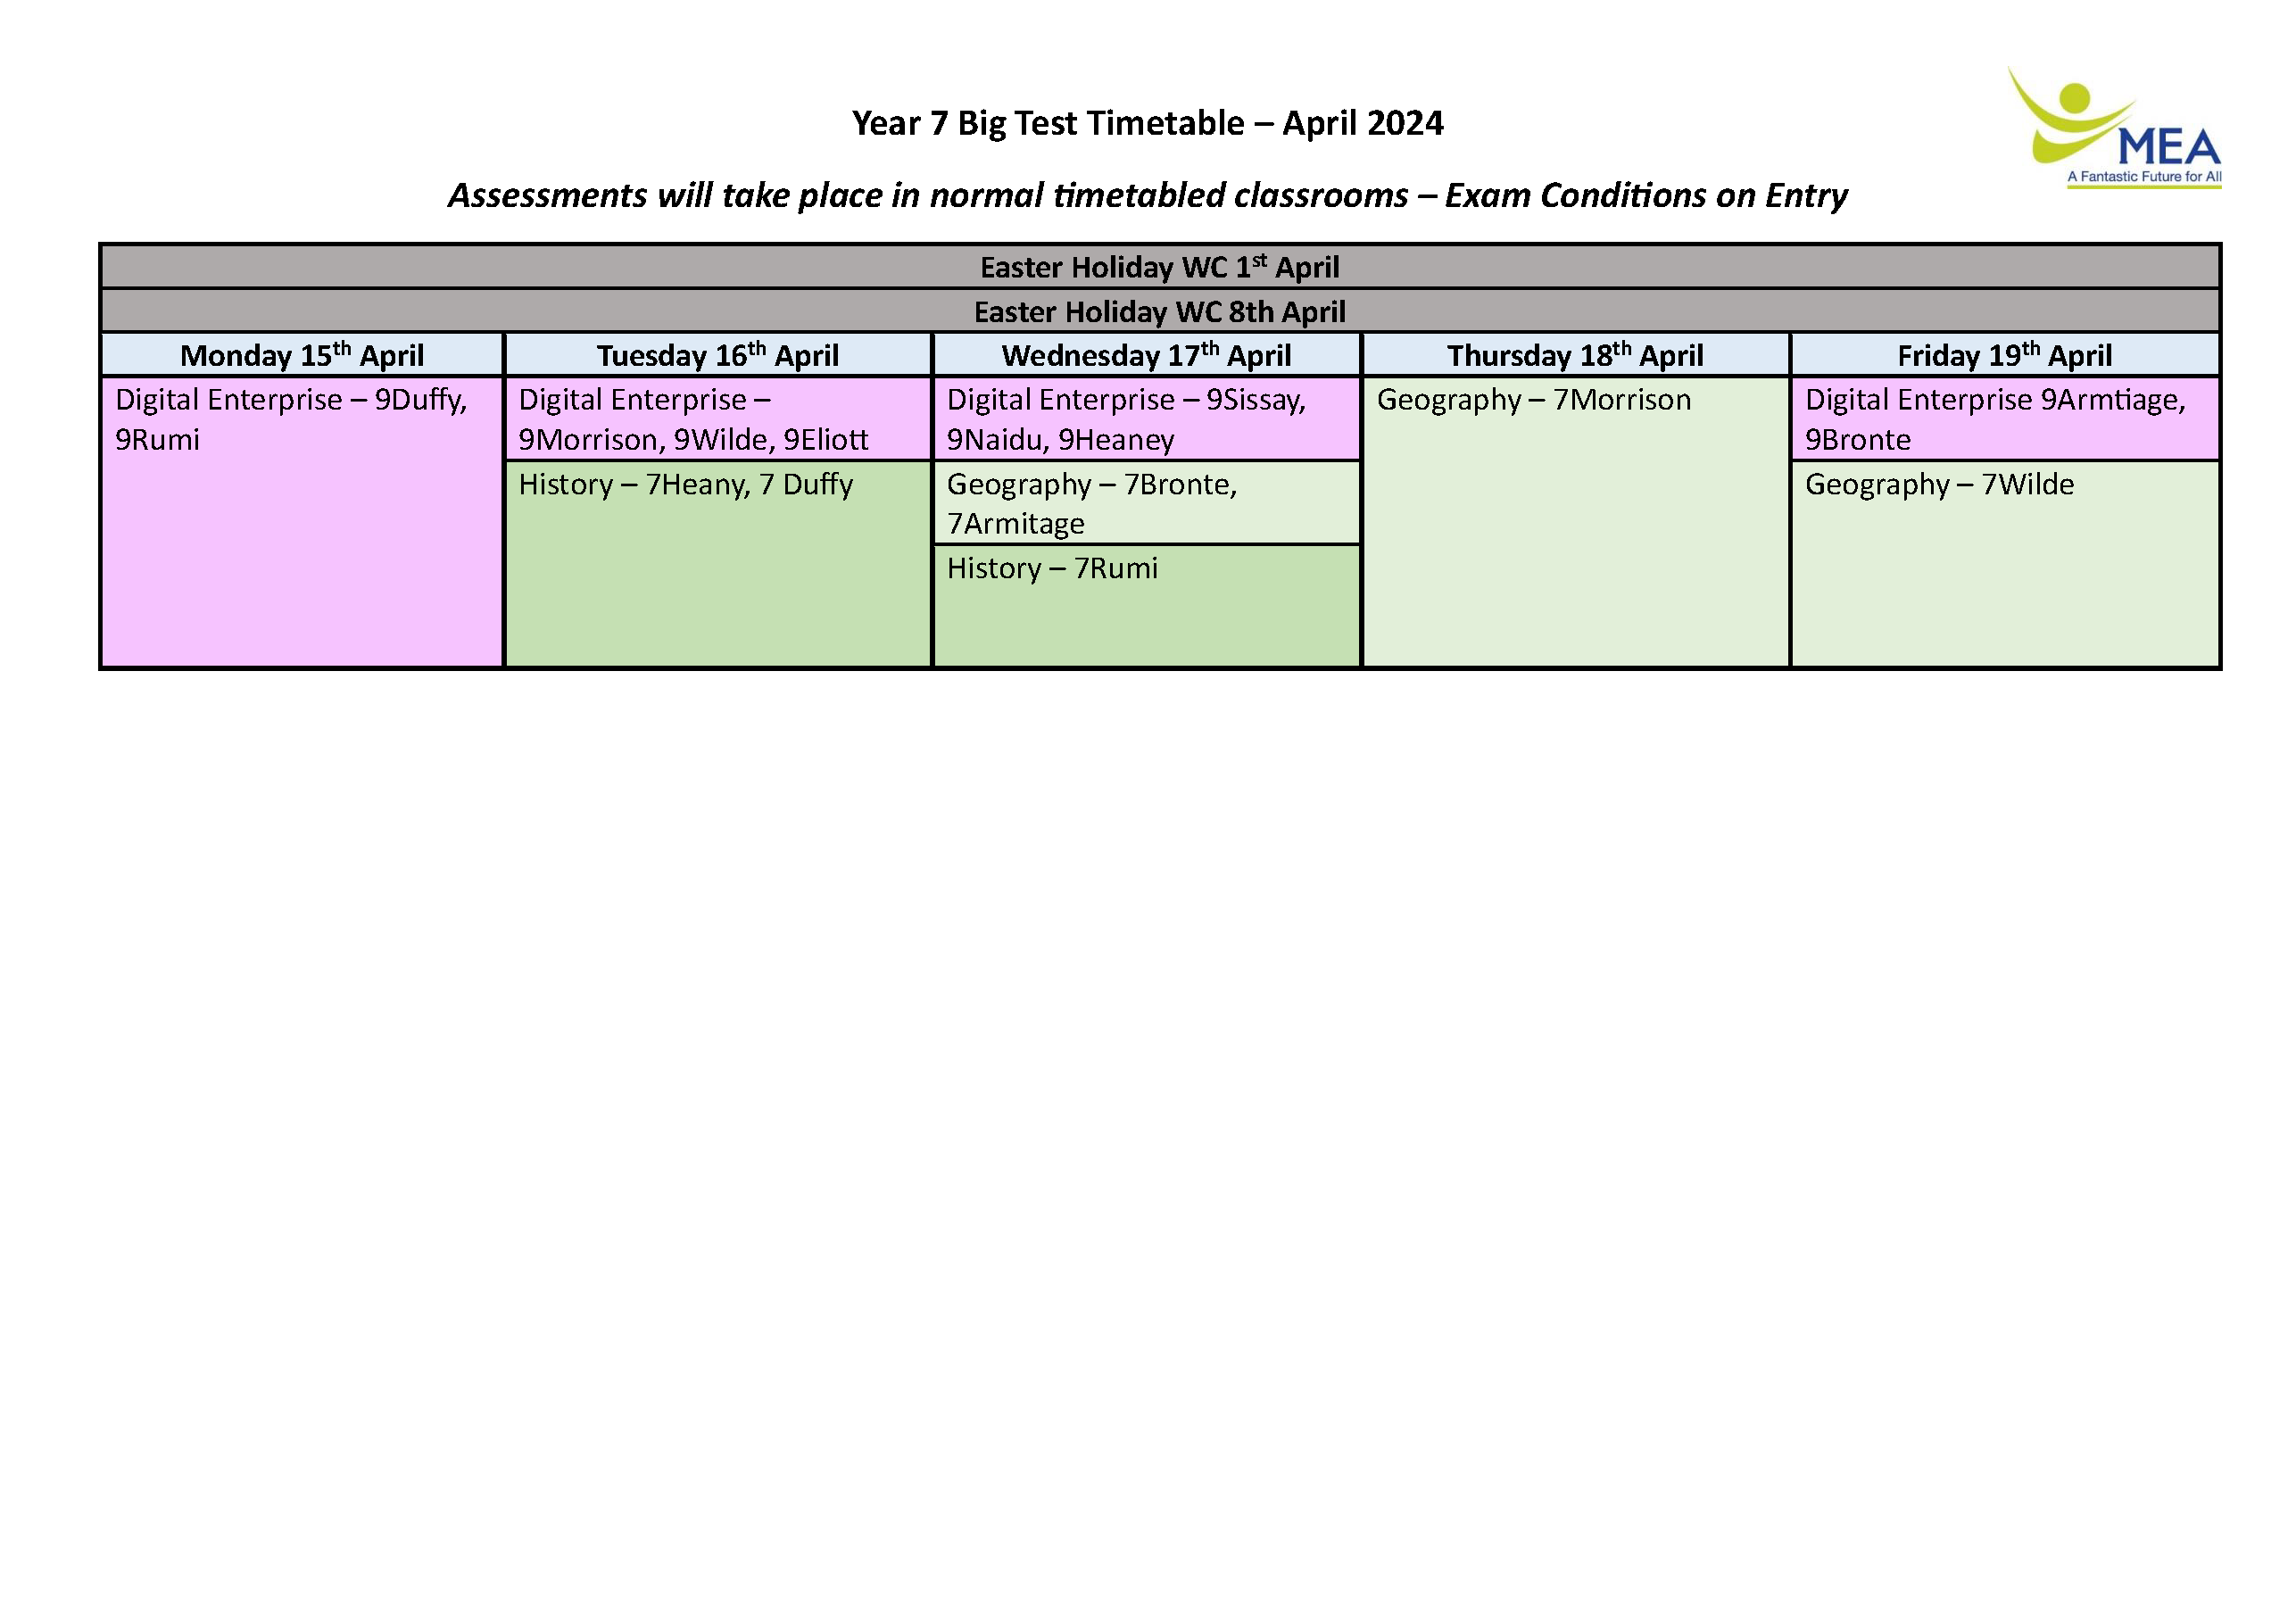 Updated Y7 Big Test Timetable March 24